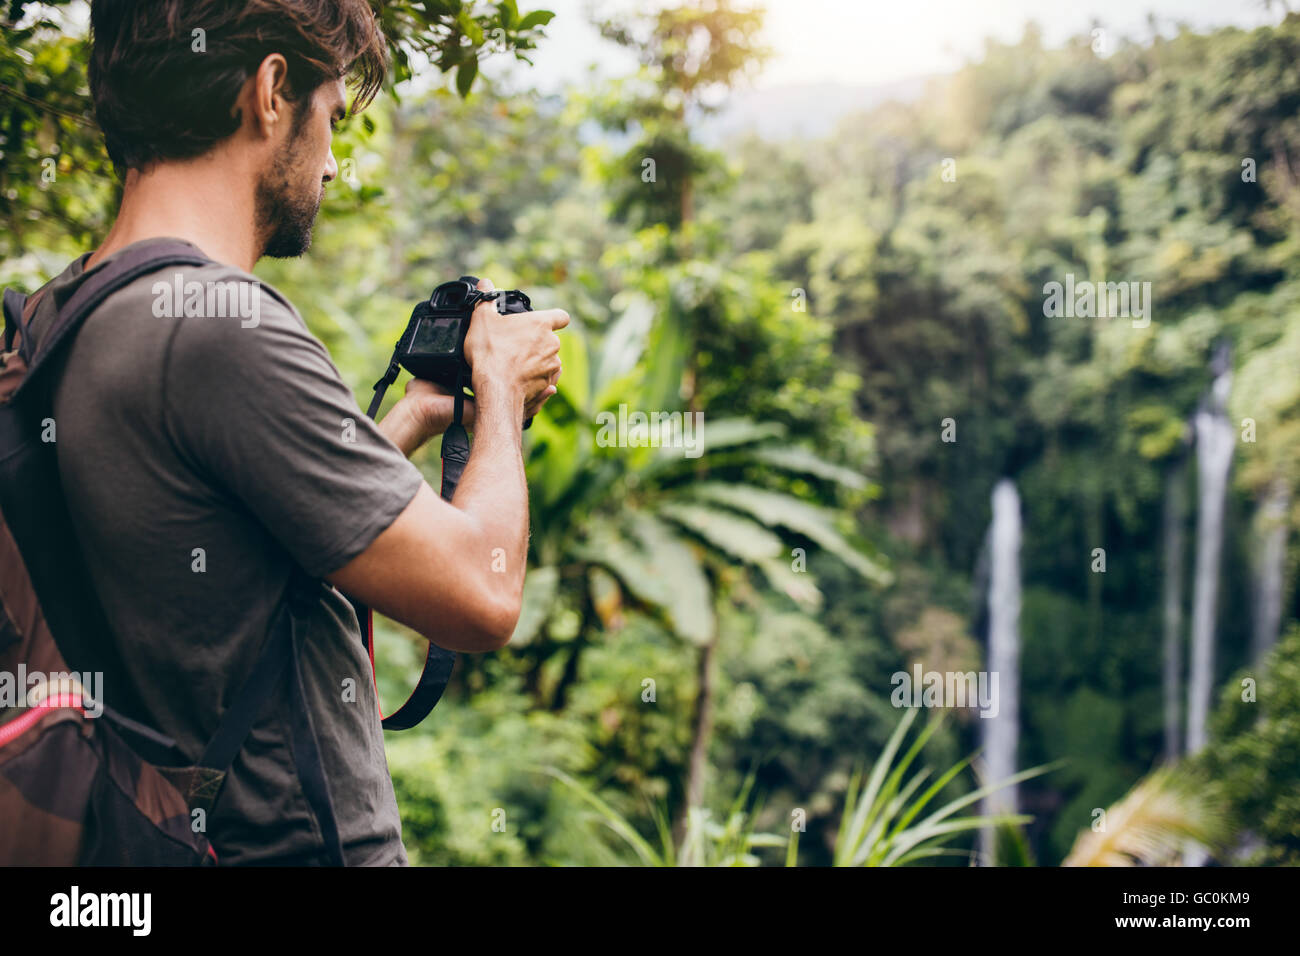 Shot of young man with backpack taking a photo of waterfall. Male hiker photographing a water fall in forest. Stock Photo